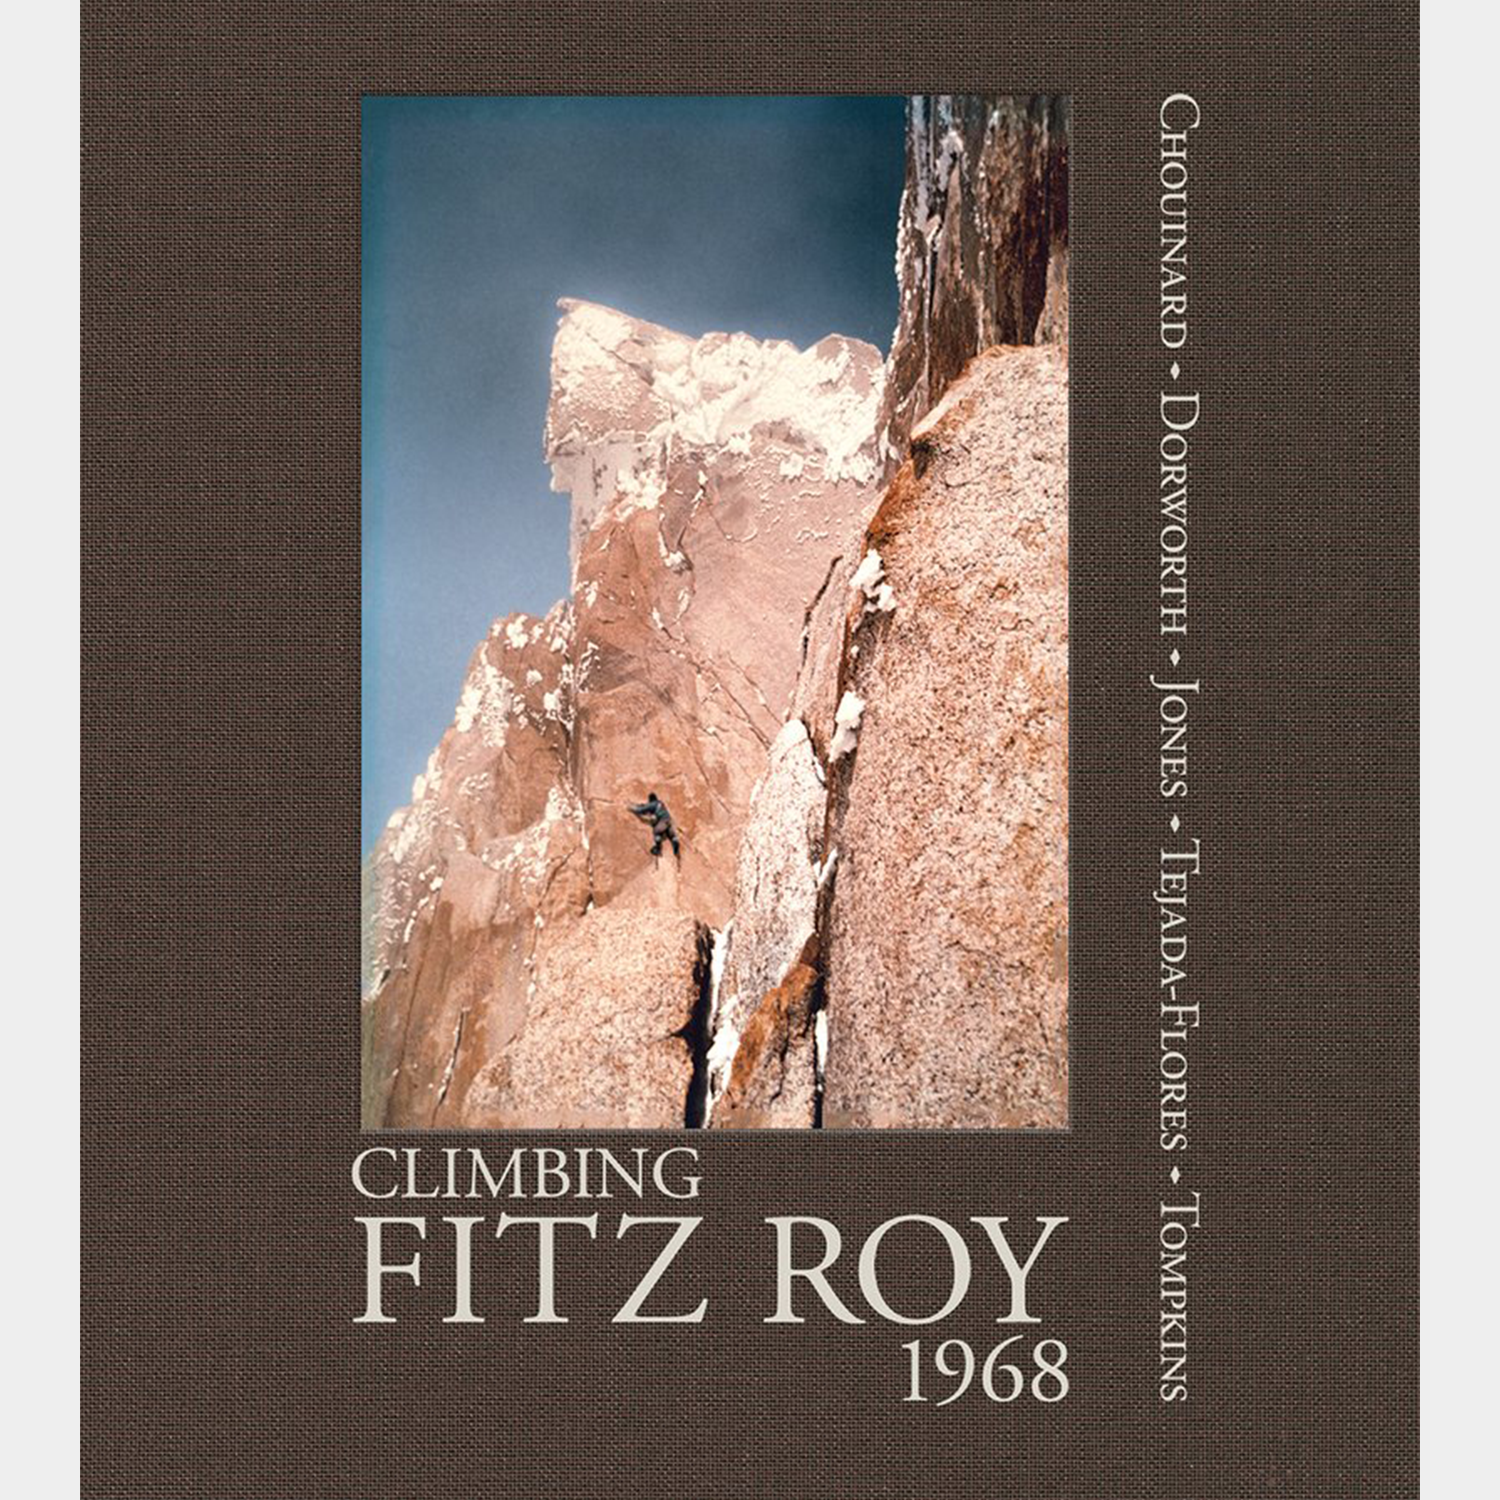 Climbing Fitz Roy, 1968 : Reflections on the Lost Photos of the Third Ascent